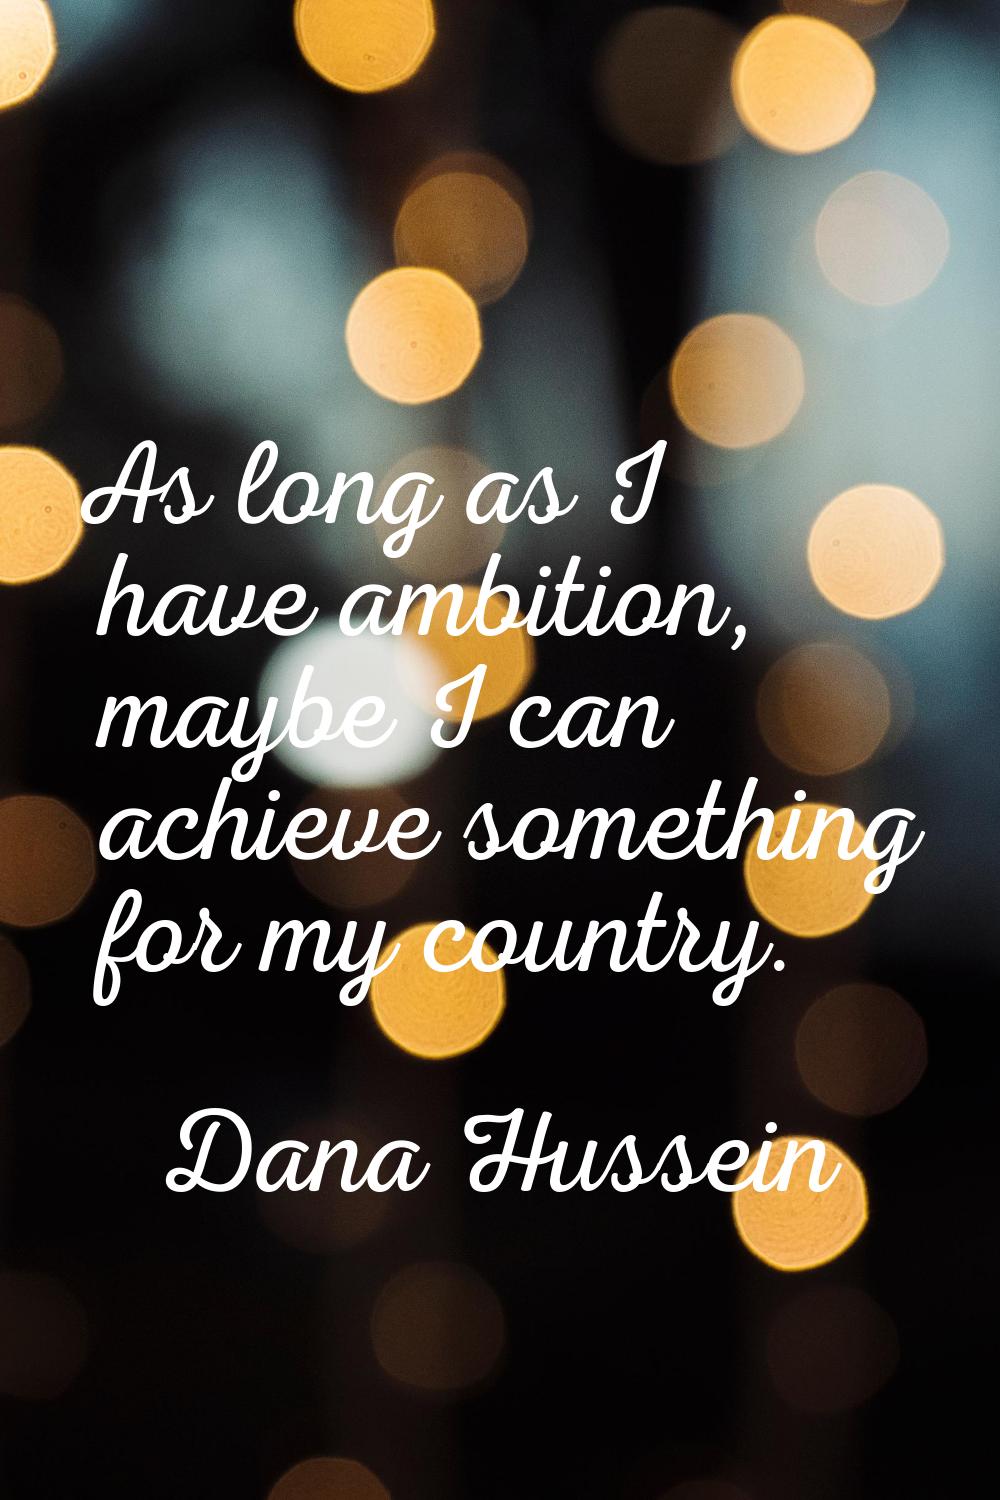 As long as I have ambition, maybe I can achieve something for my country.